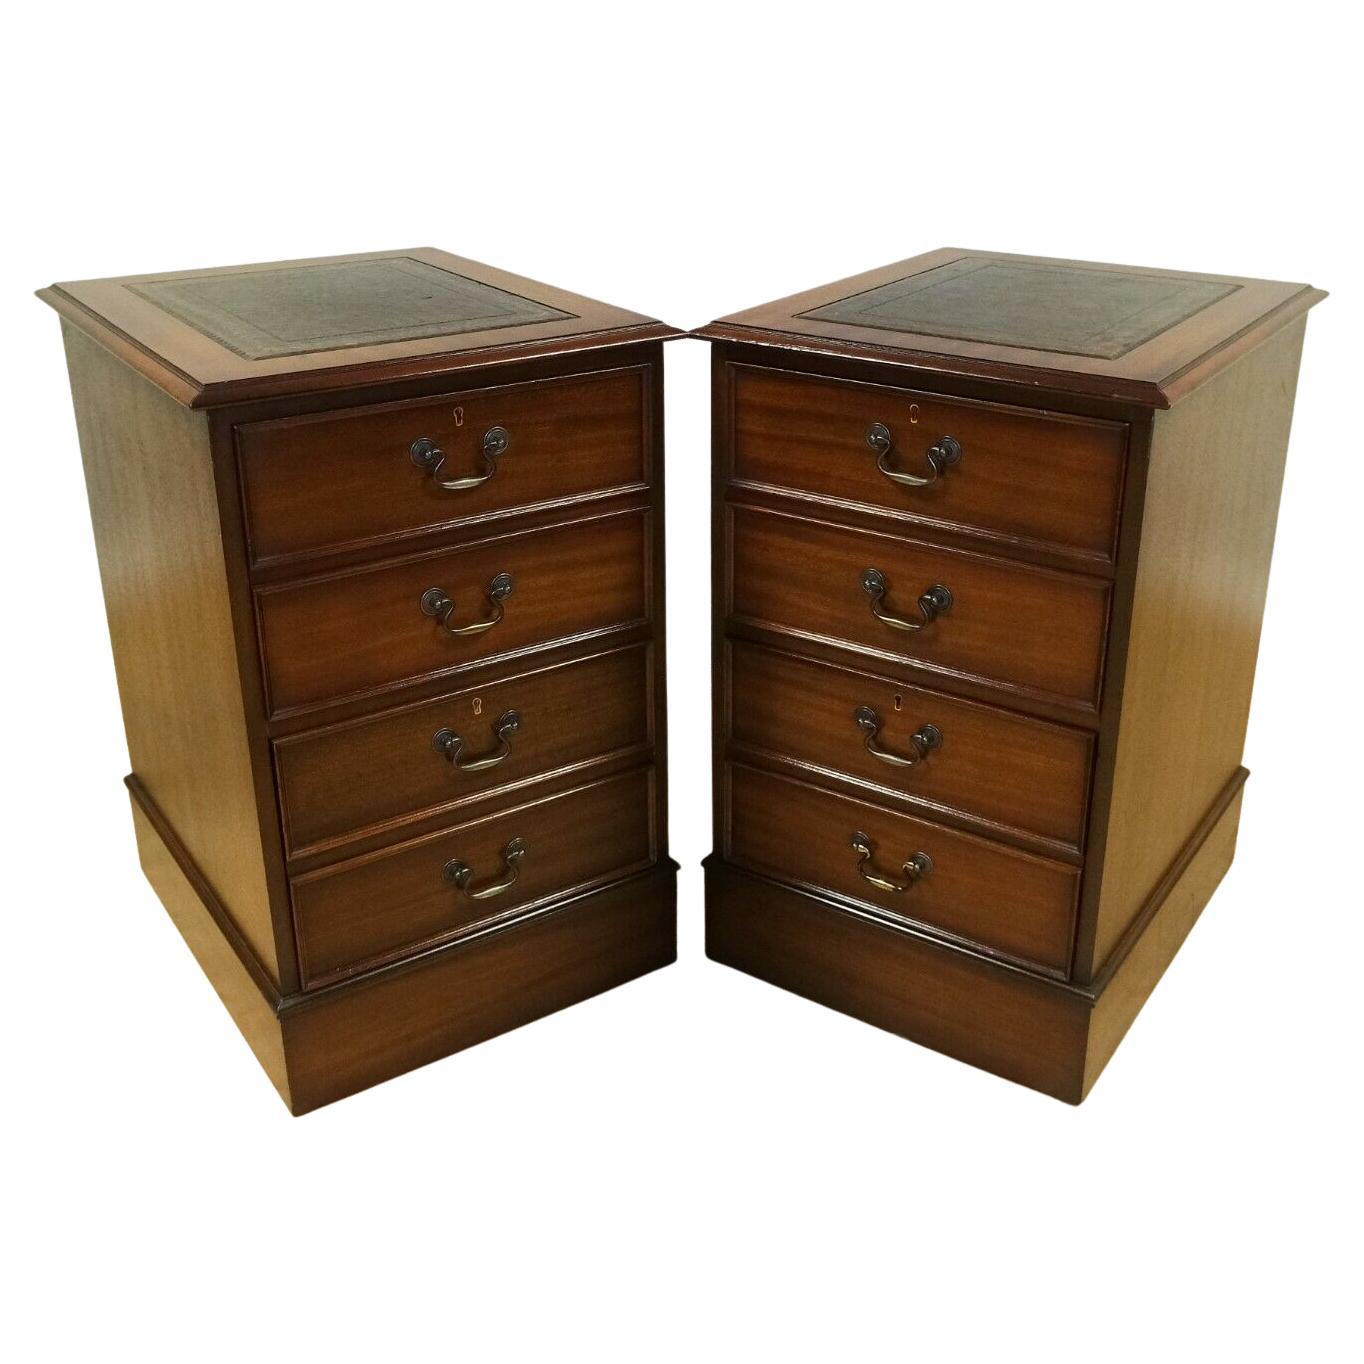 Lovely Pair of Brown Mahogany Filing Cabinets with Green Gold Leaf Leather Top